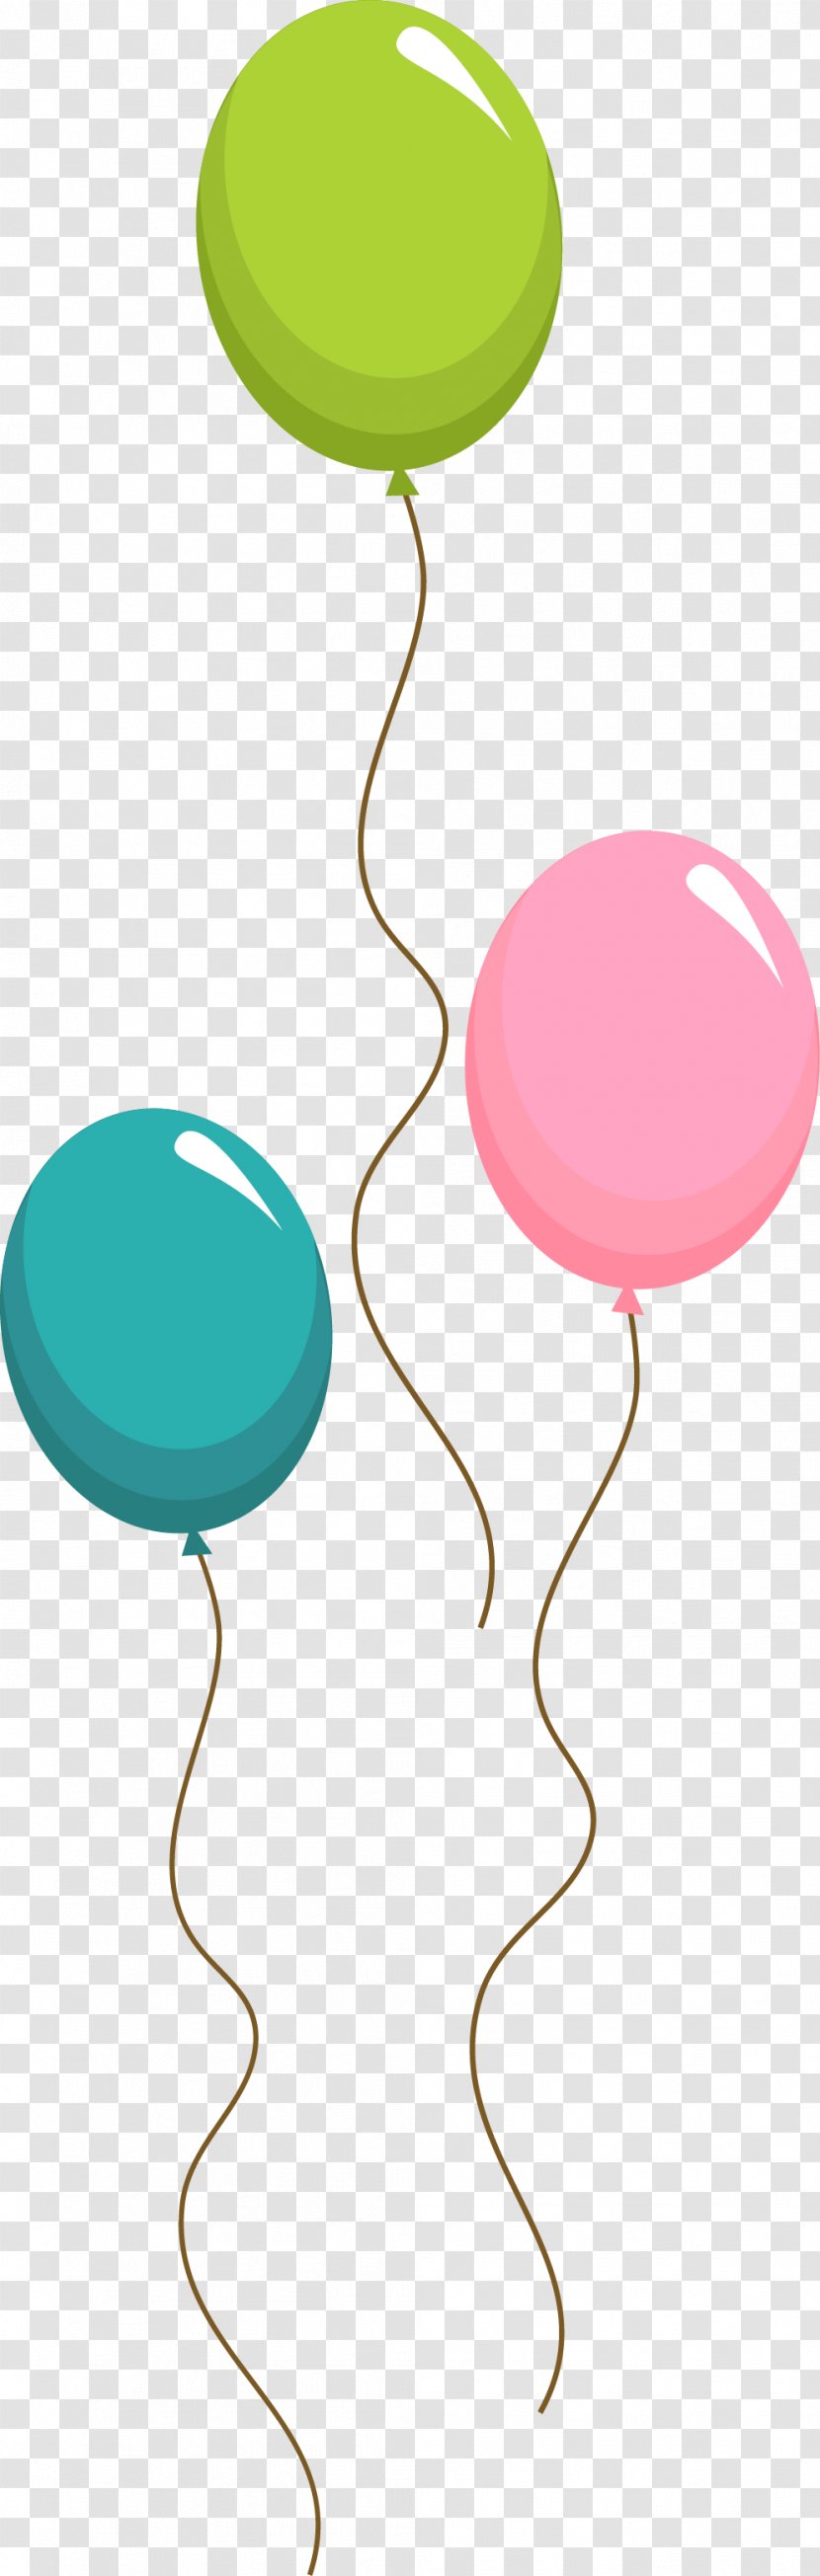 Gas Balloon Toy Transparent PNG